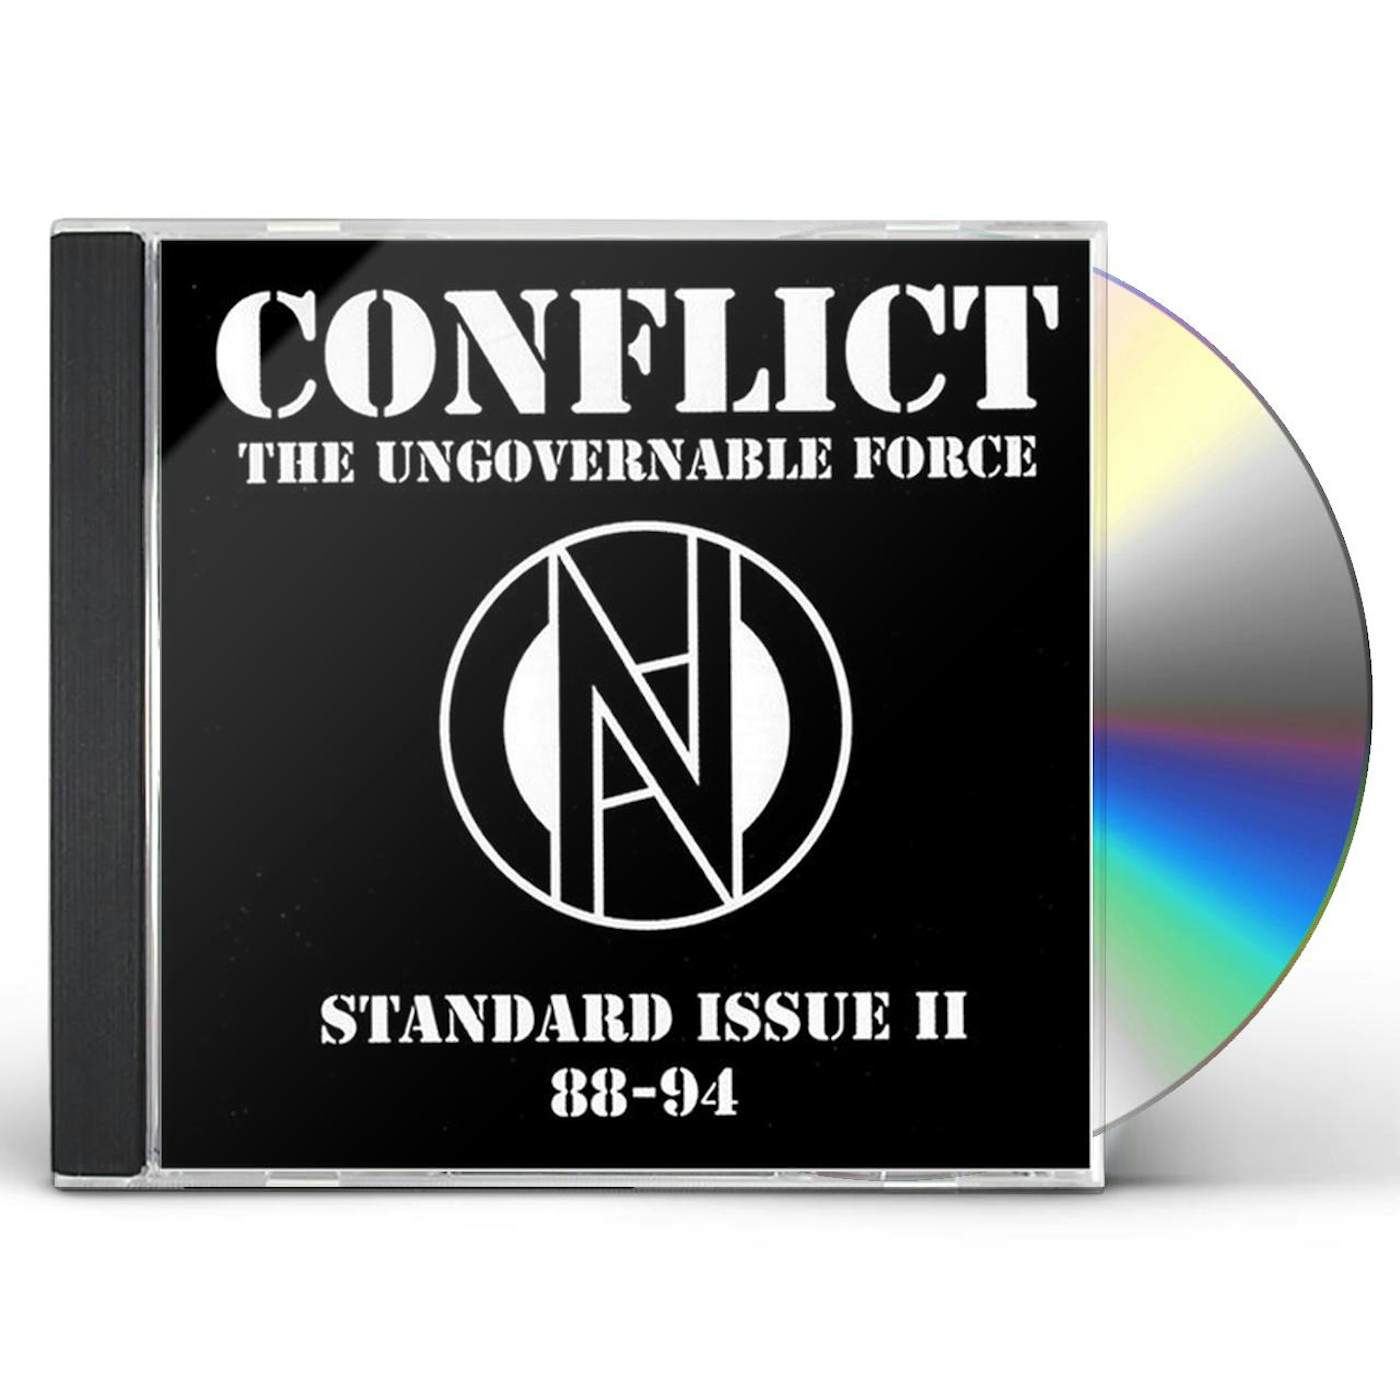 Conflict STANDARD ISSUE II 88-94 CD